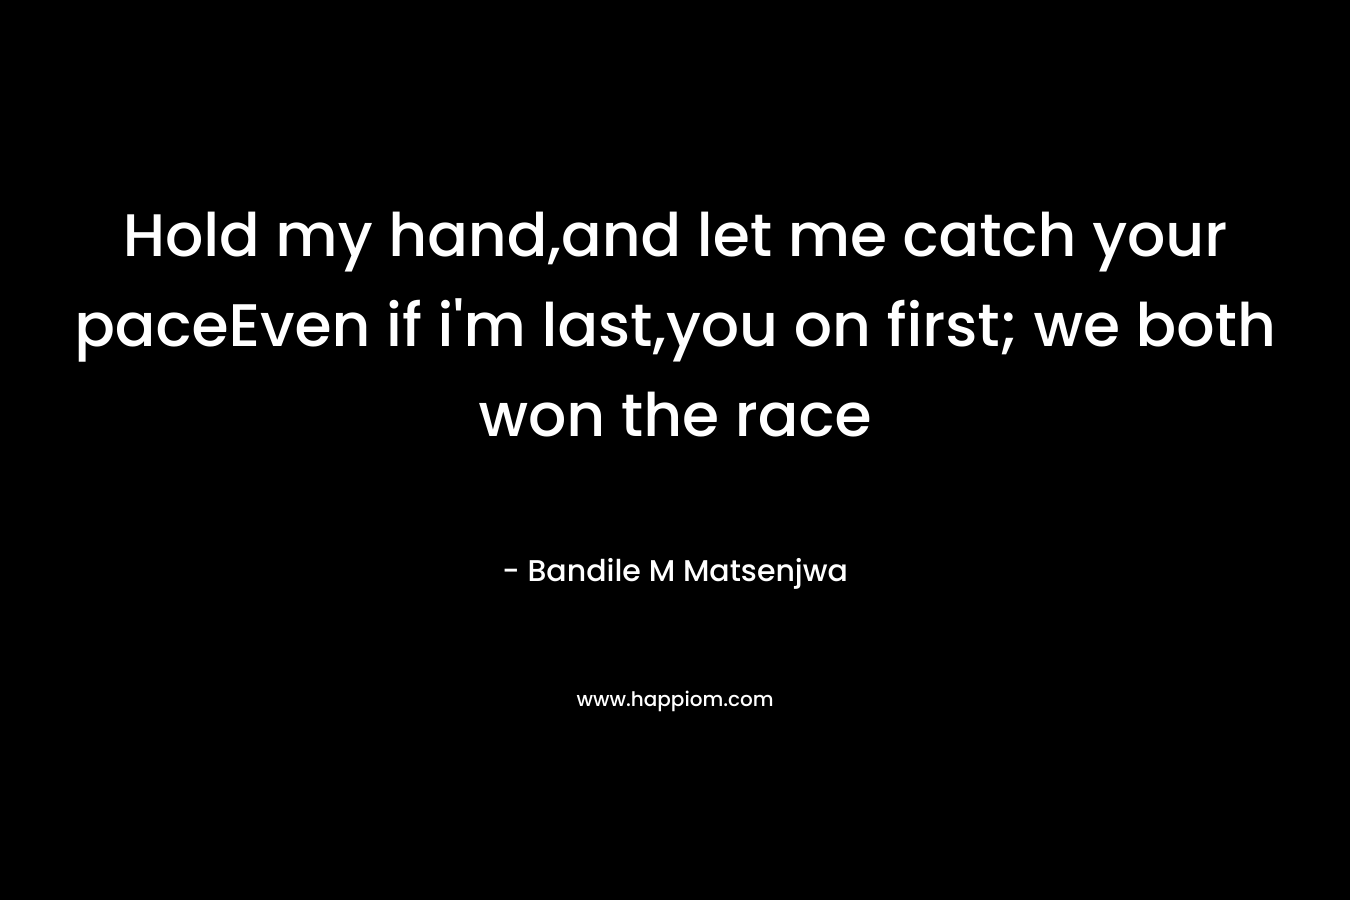 Hold my hand,and let me catch your paceEven if i'm last,you on first; we both won the race